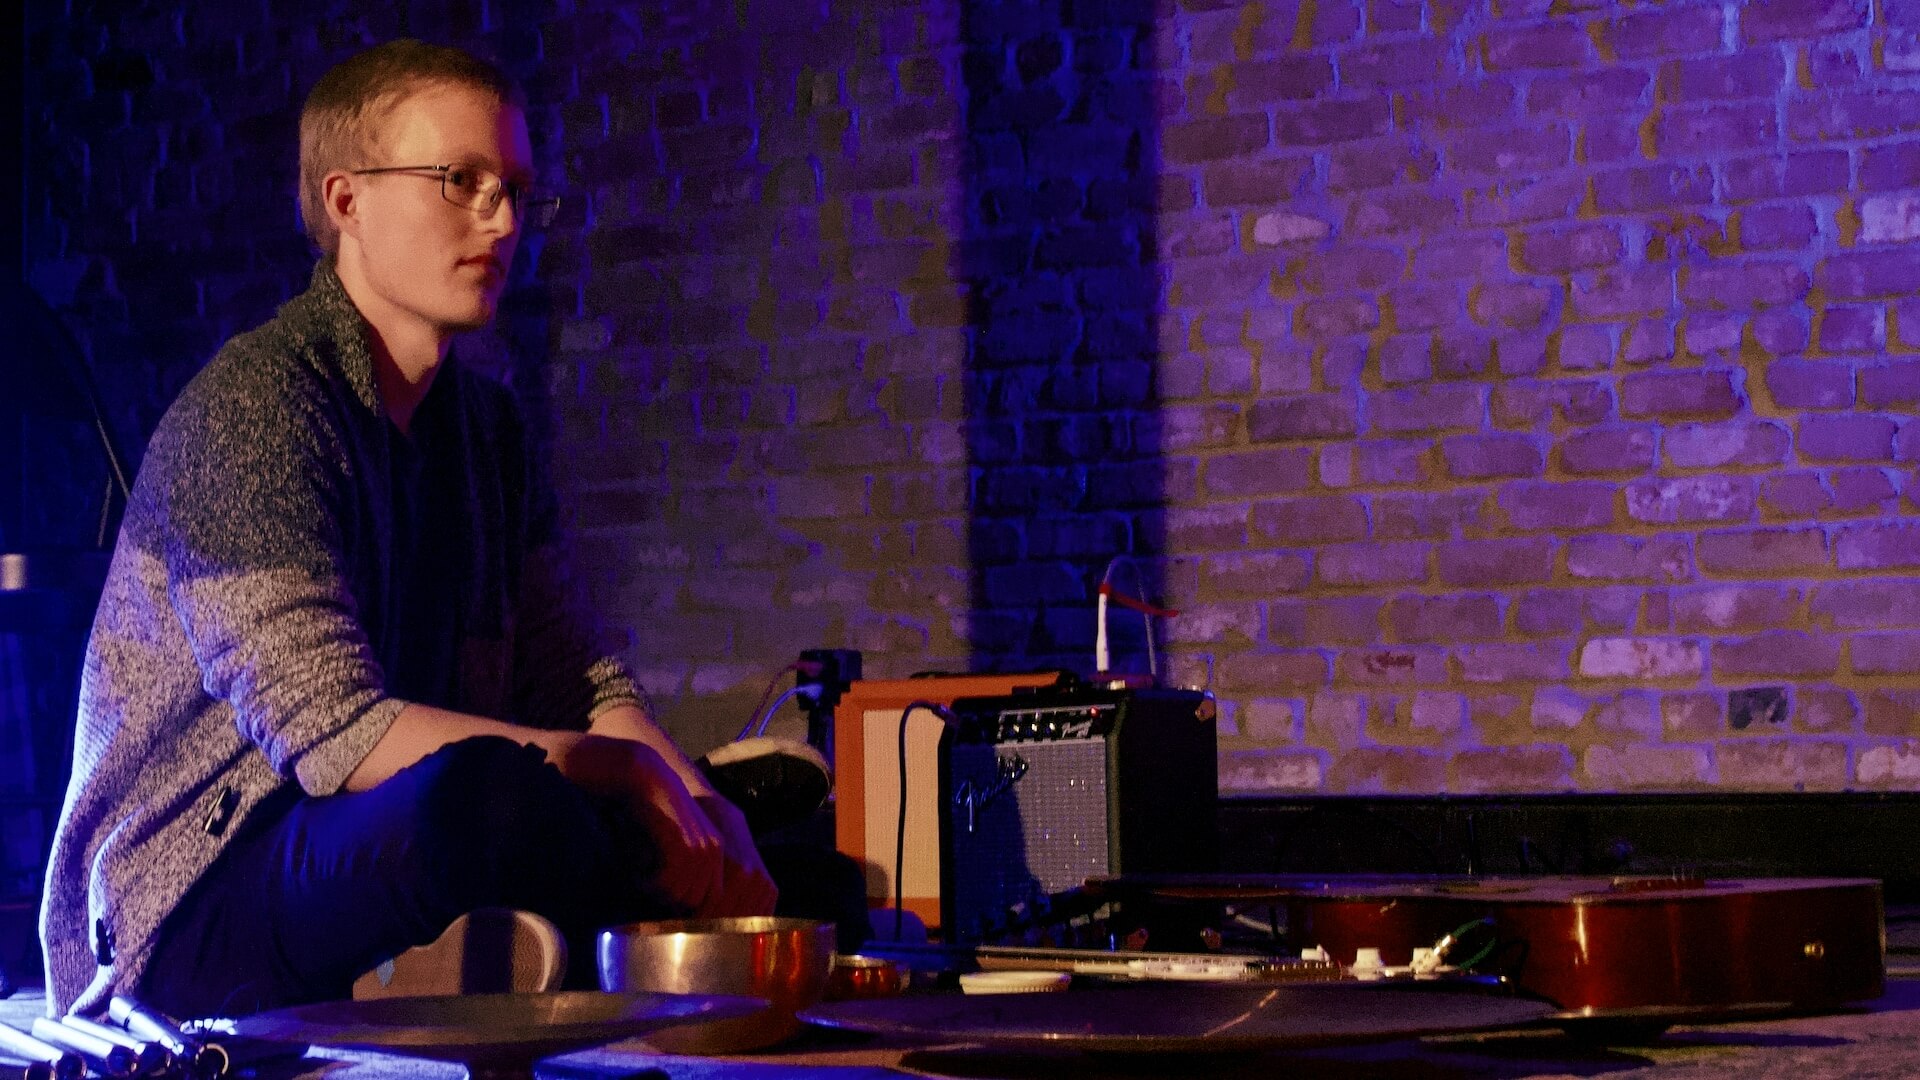 Eric Lennartson sits in front of a wide array of instruments including: singing bowls, wind chimes, cymbals, and two guitars. A purple and blue light is cast on a brick wall background.